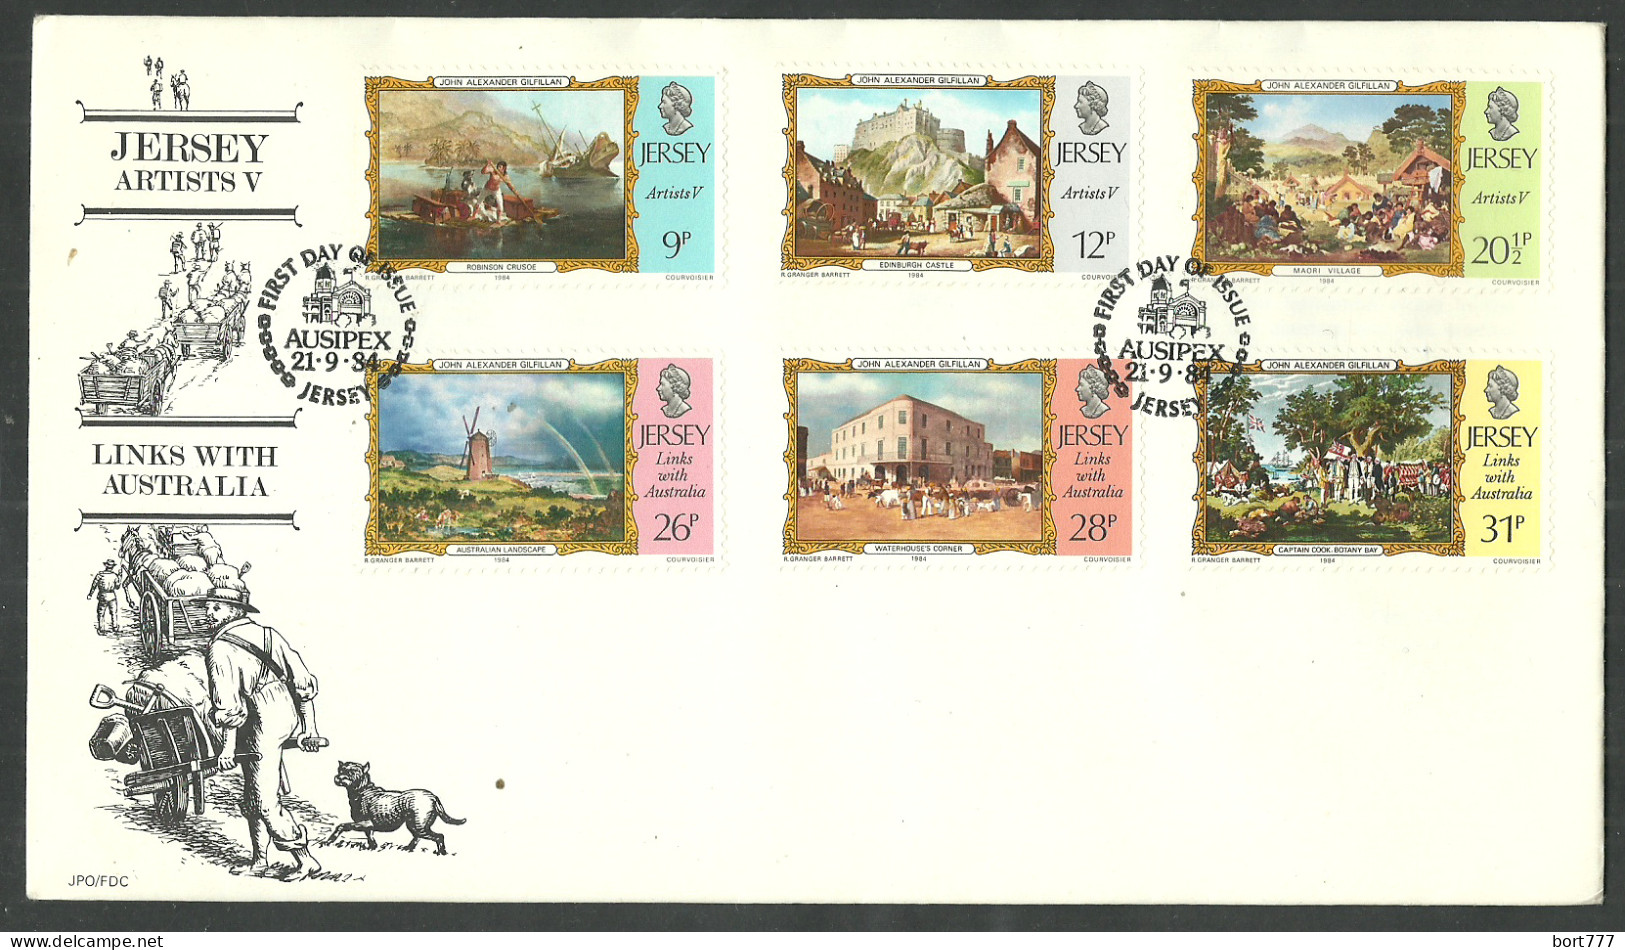 JERSEY 1984 FDC COVER - Painting - Jersey